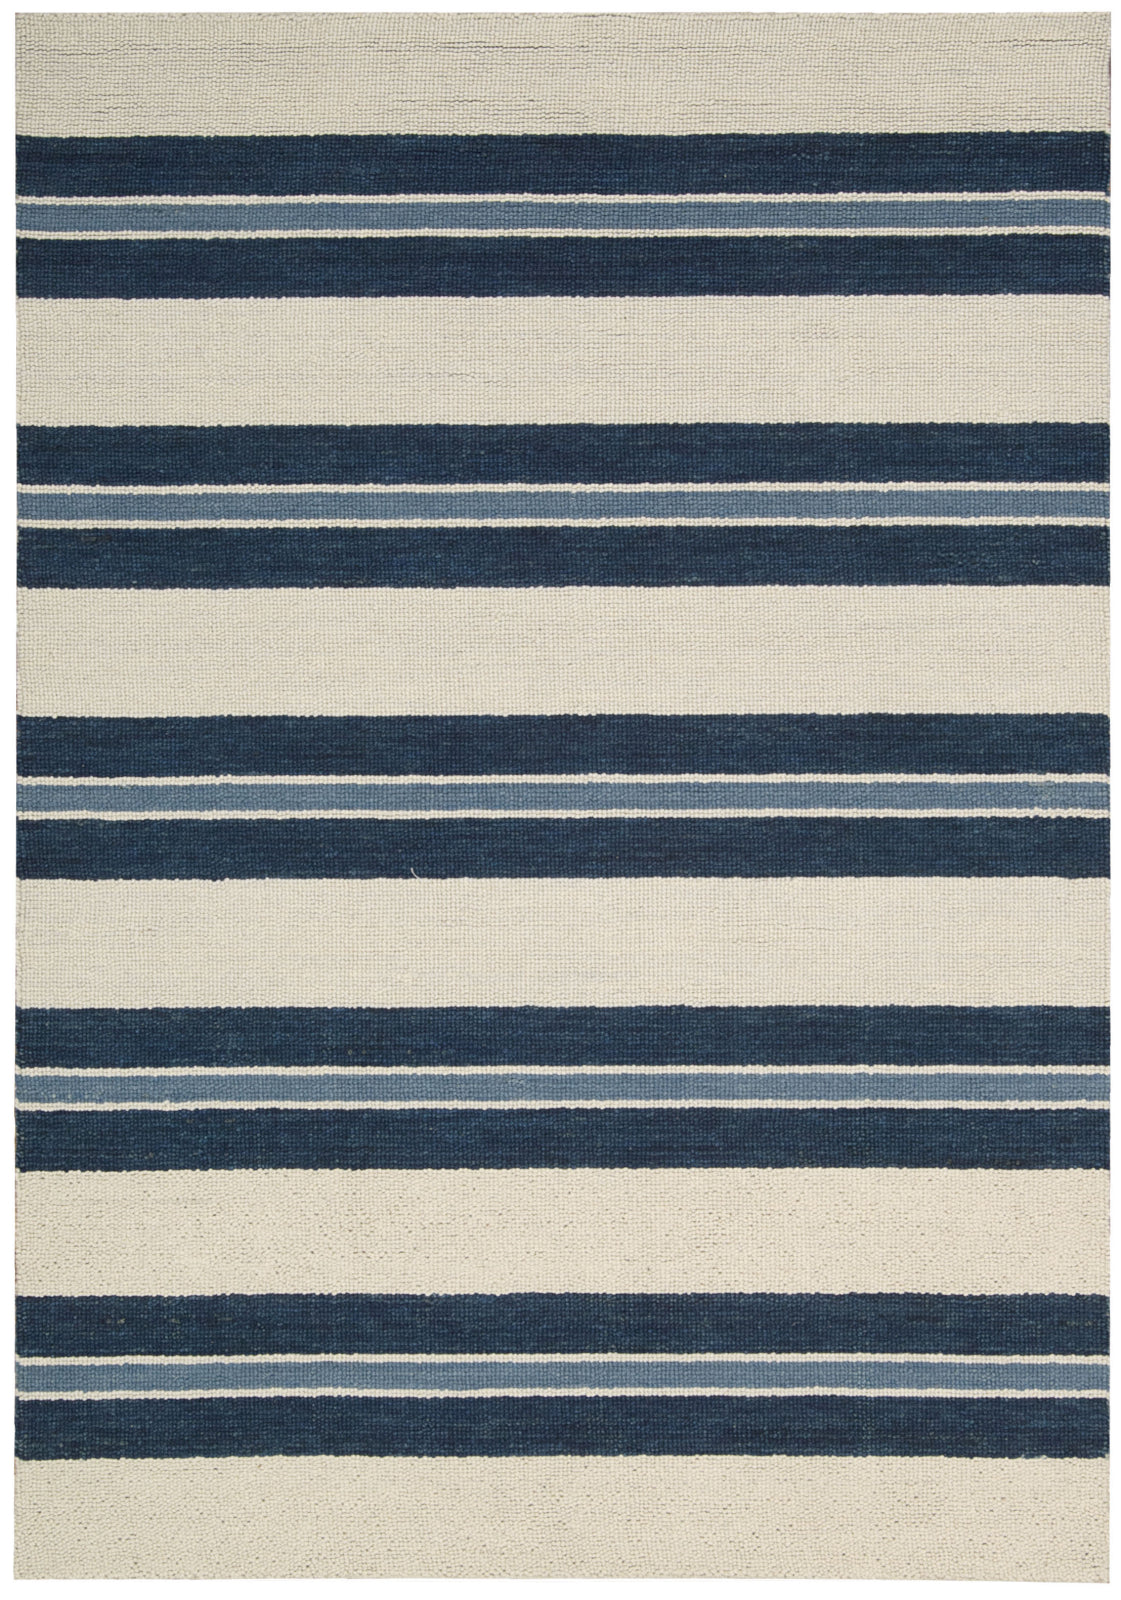 Nourison Oxford OXFD2 Awning Stripe Area Rug by Barclay Butera main image